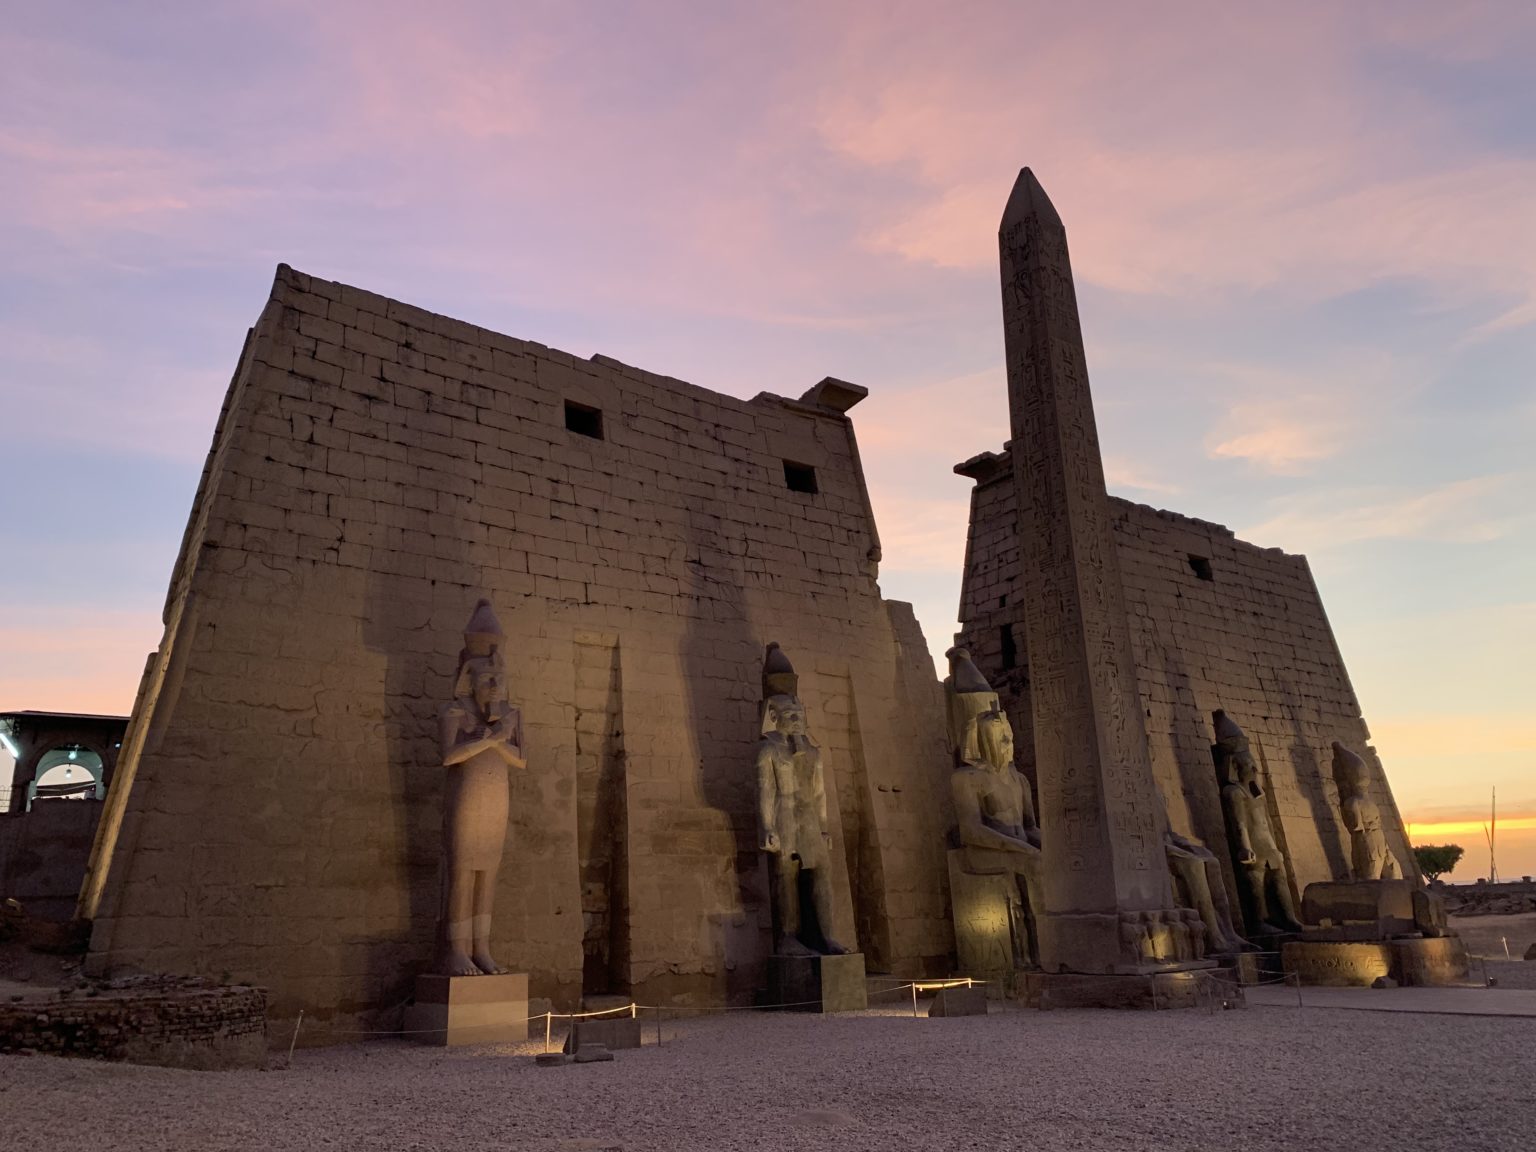 Luxor temple column and statues at sunset